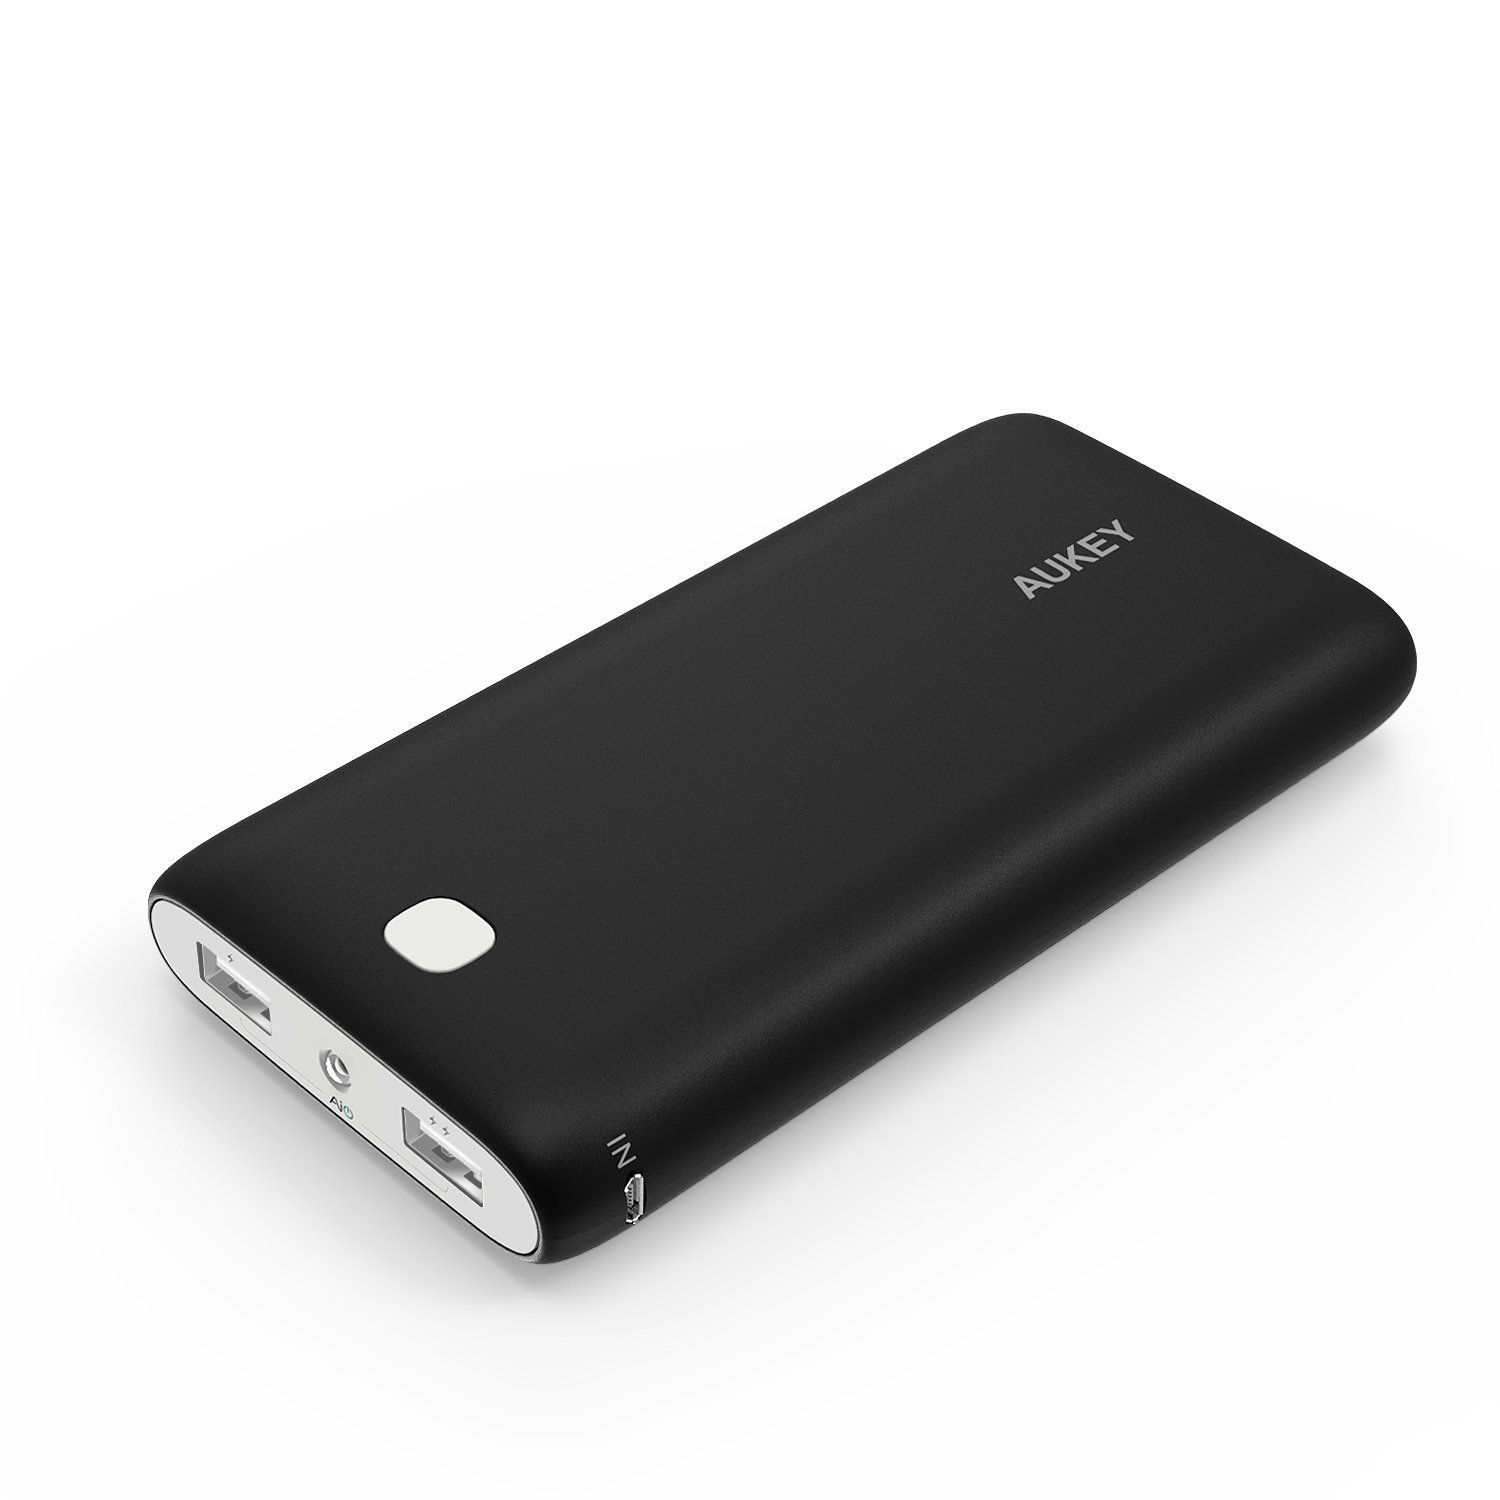 Knowing the AUKEY Portable Charger